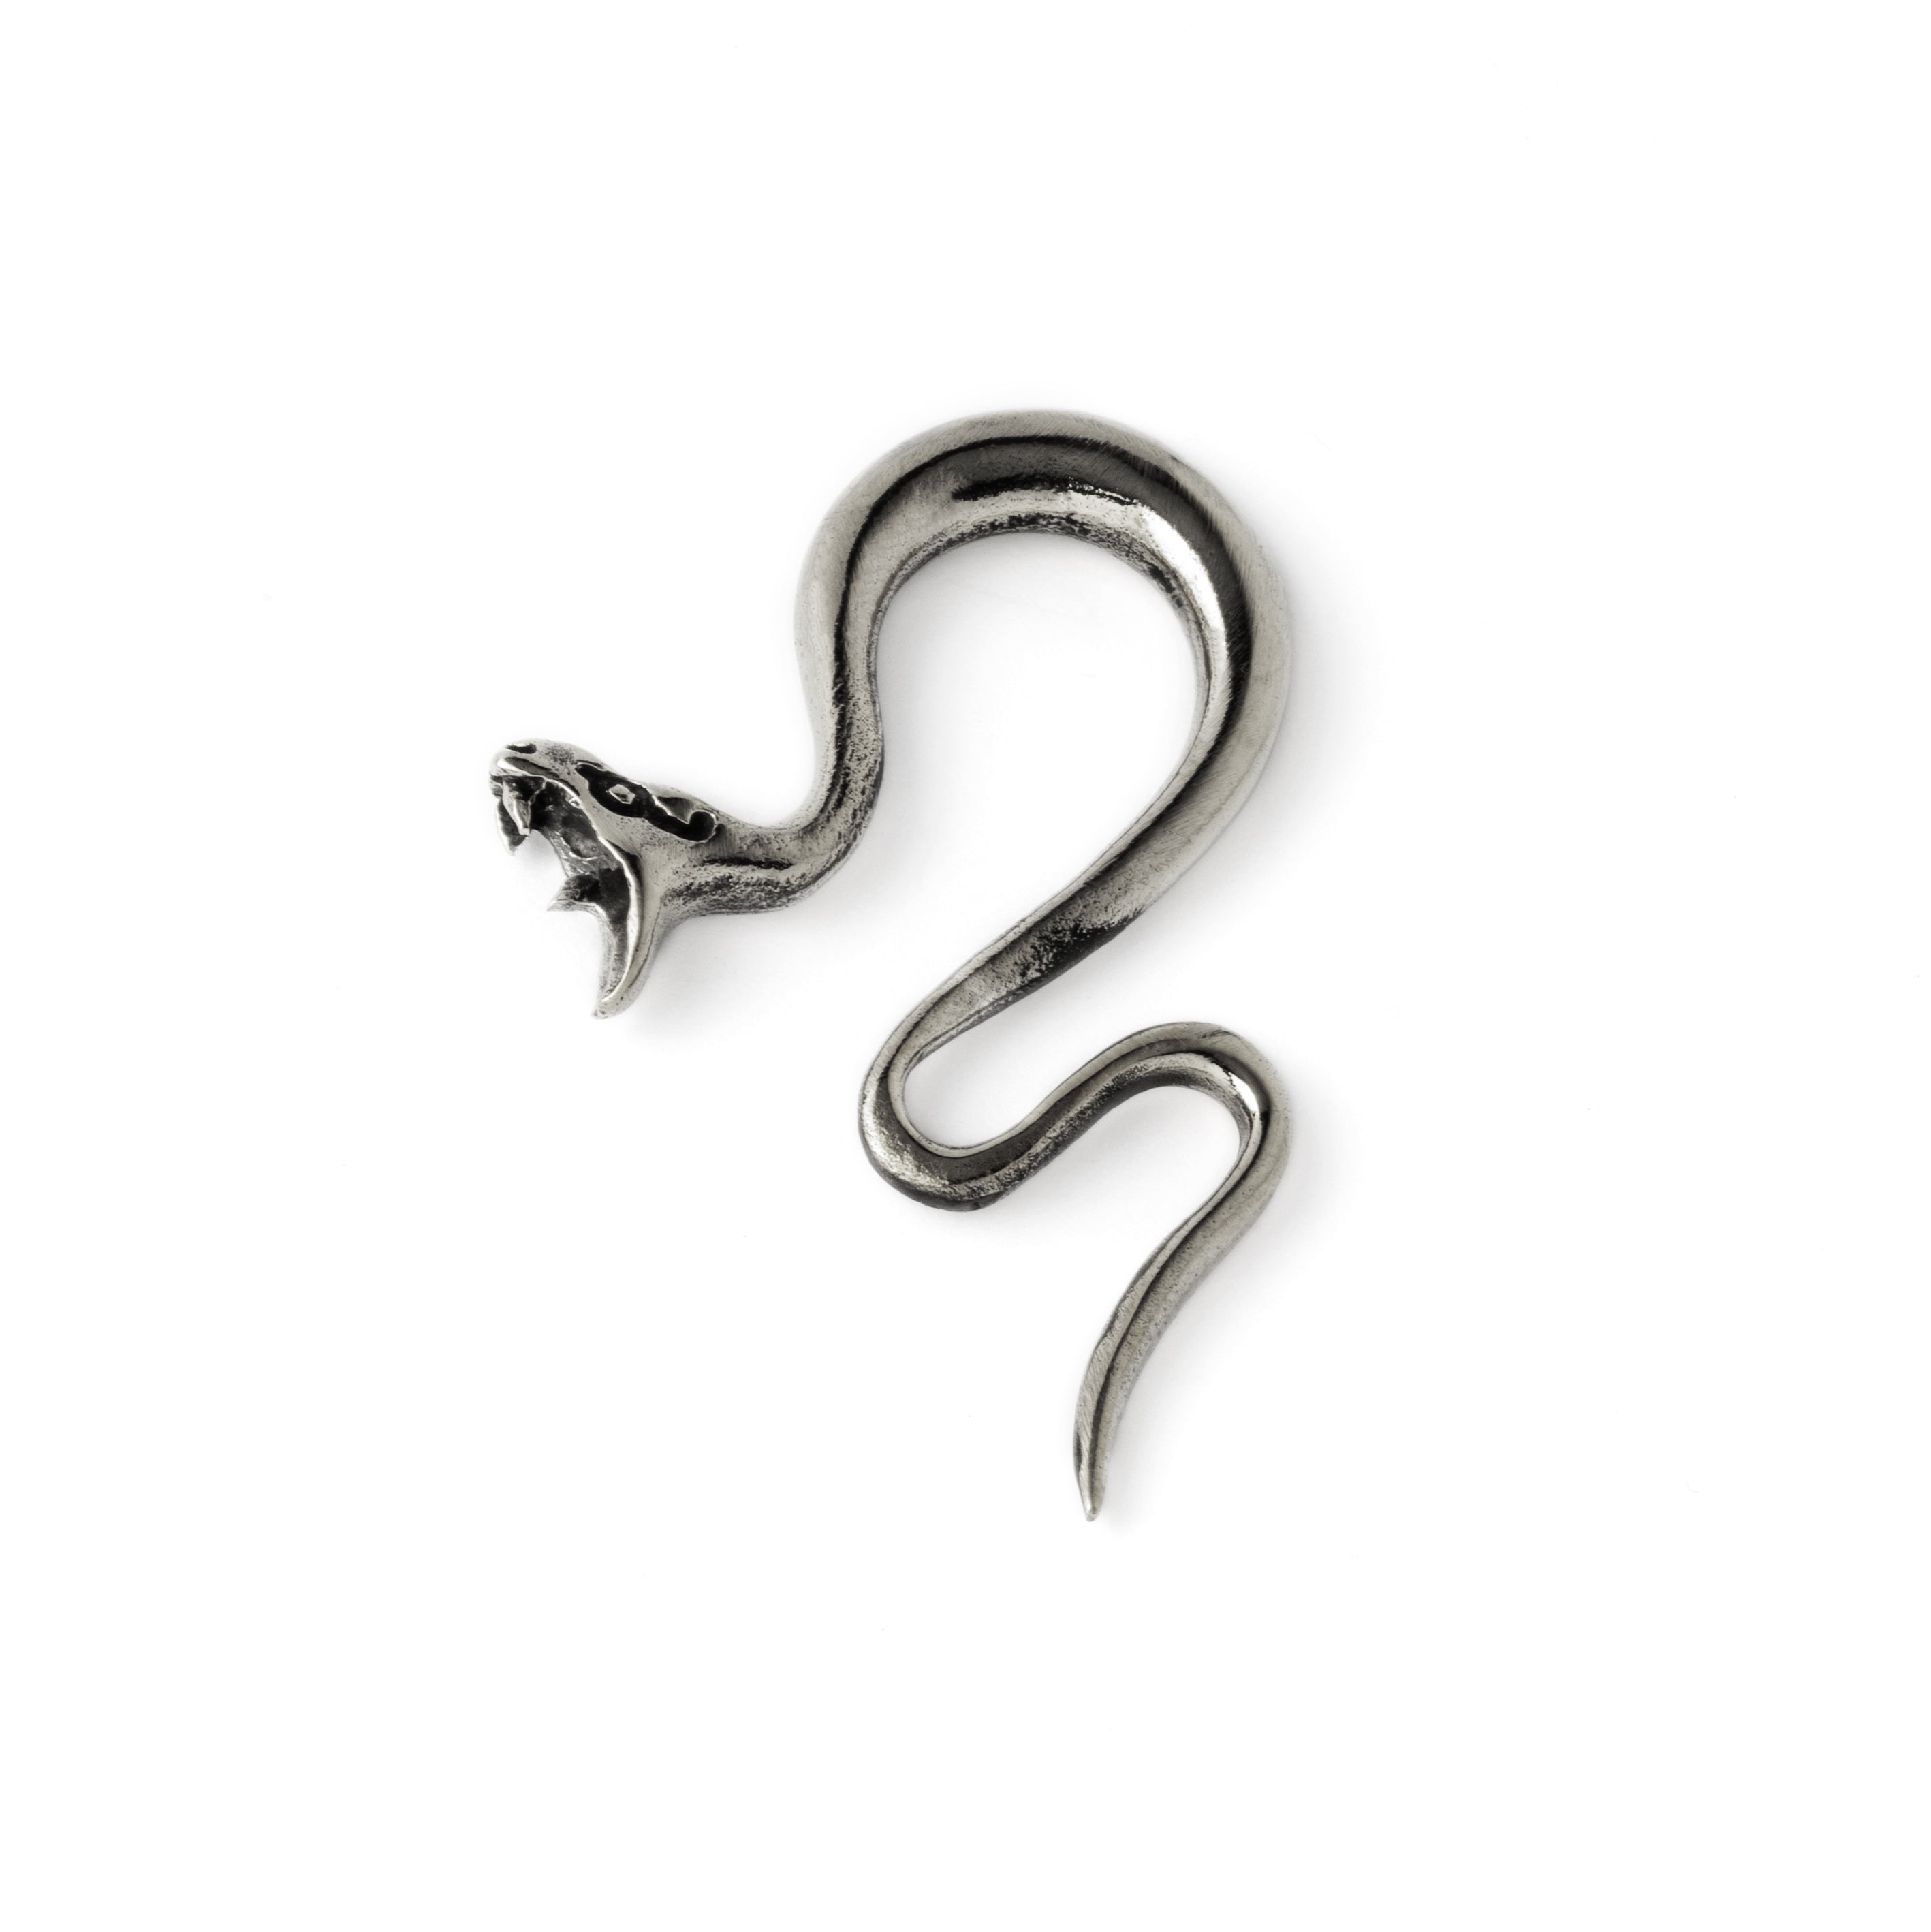 single silver brass serpent ear hanger stretcher for stretched ears right side view